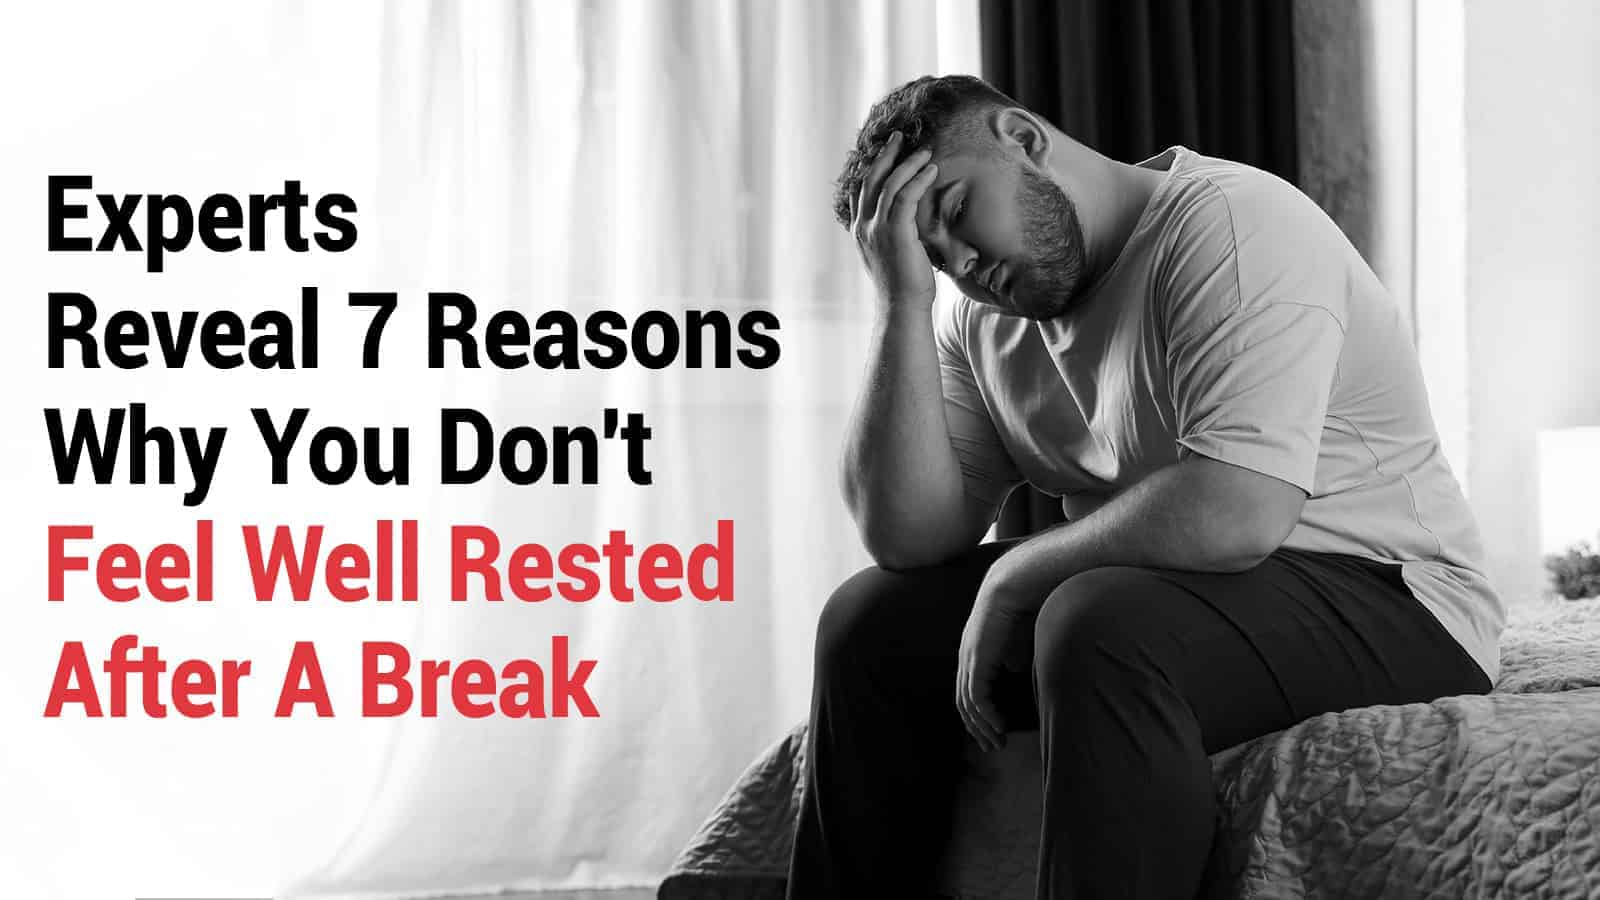 Experts Reveal 7 Reasons Why You Don’t Feel Well Rested After A Break